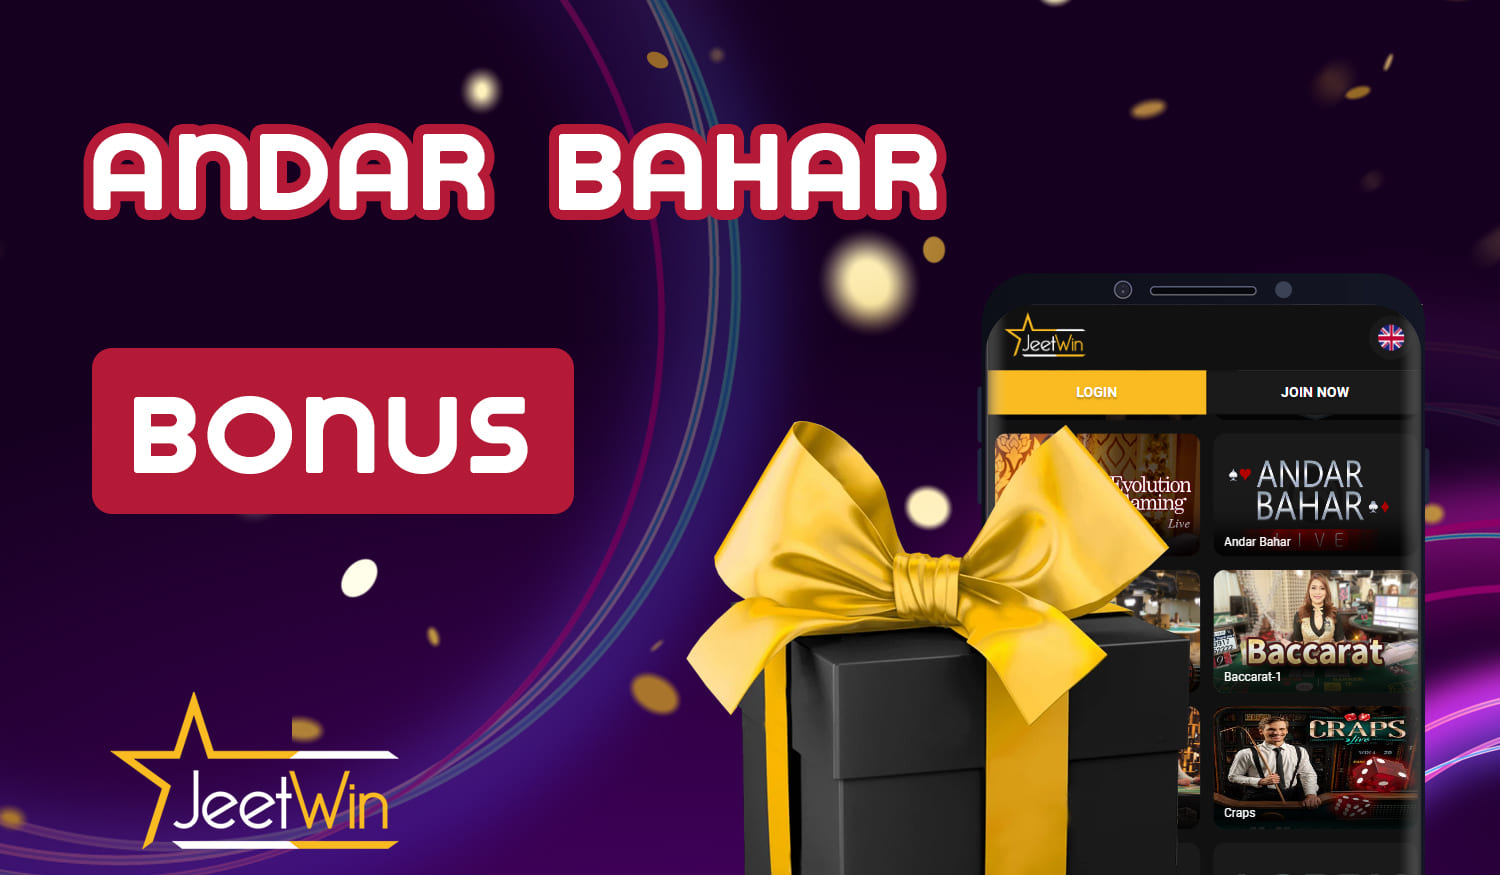 Bonuses prepared by Jetwin for Andar Bahar Indian fans